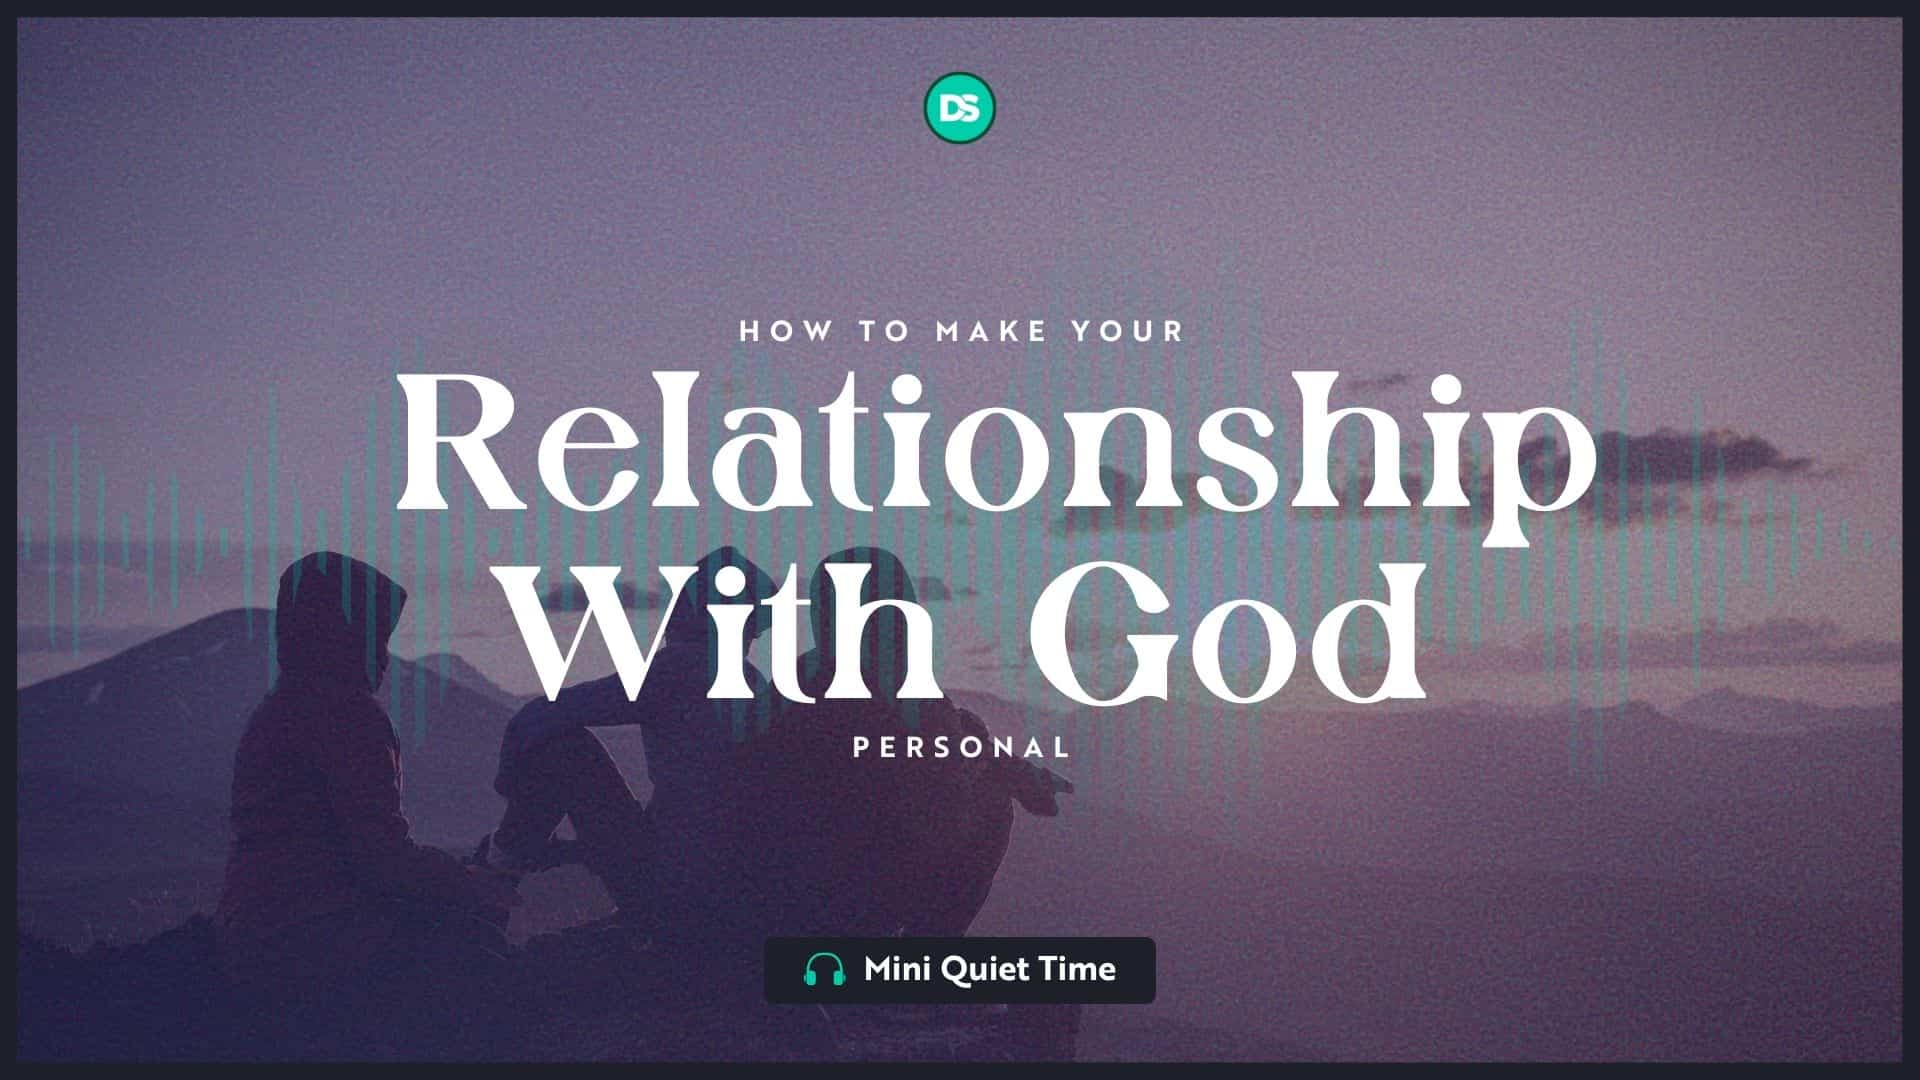 How to Make Your Relationship With God Personal (Mini Quiet Time) 11